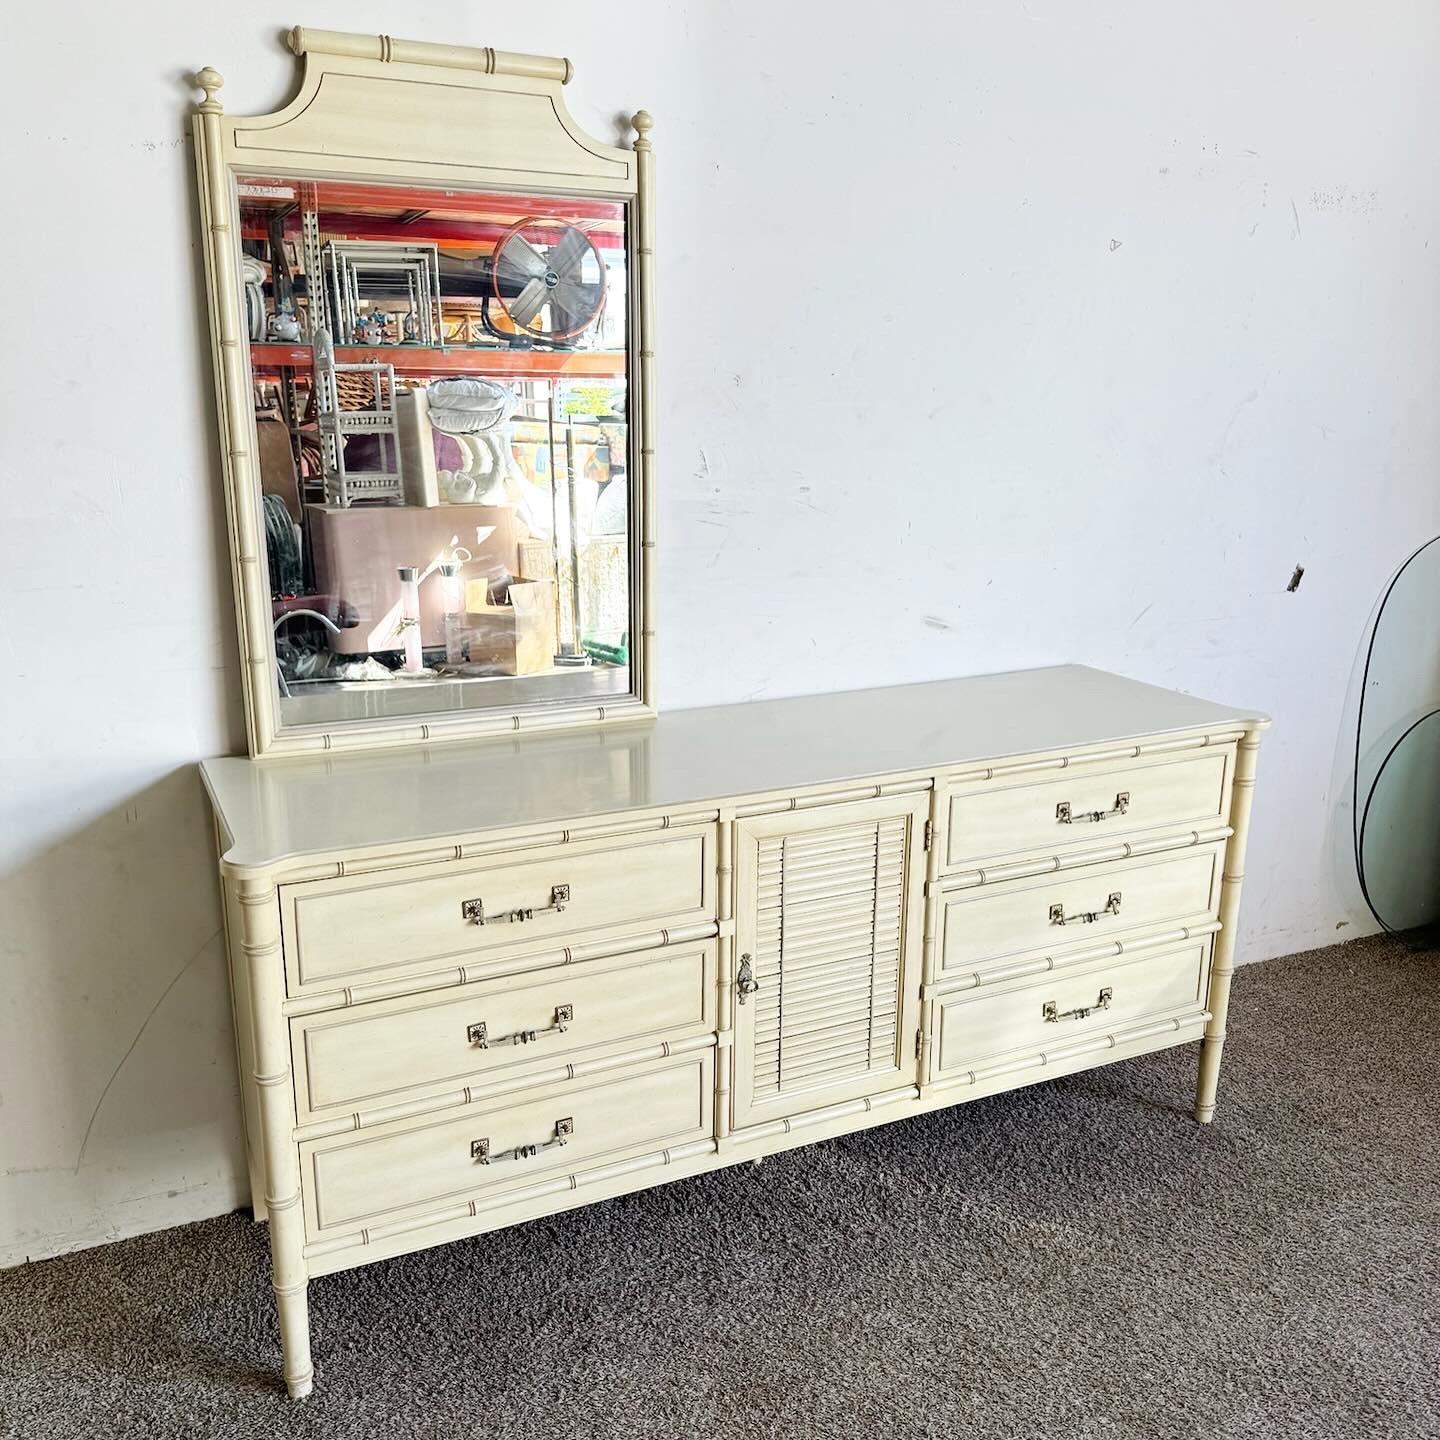 Discover the tropical allure of the Boho Chic Faux Bamboo ‚ÄúBali Hai‚Äù Dresser by Henry Link, accompanied by a matching mirror. Featuring faux bamboo detailing and spacious drawers, this set combines bohemian charm with classic sophistication. The